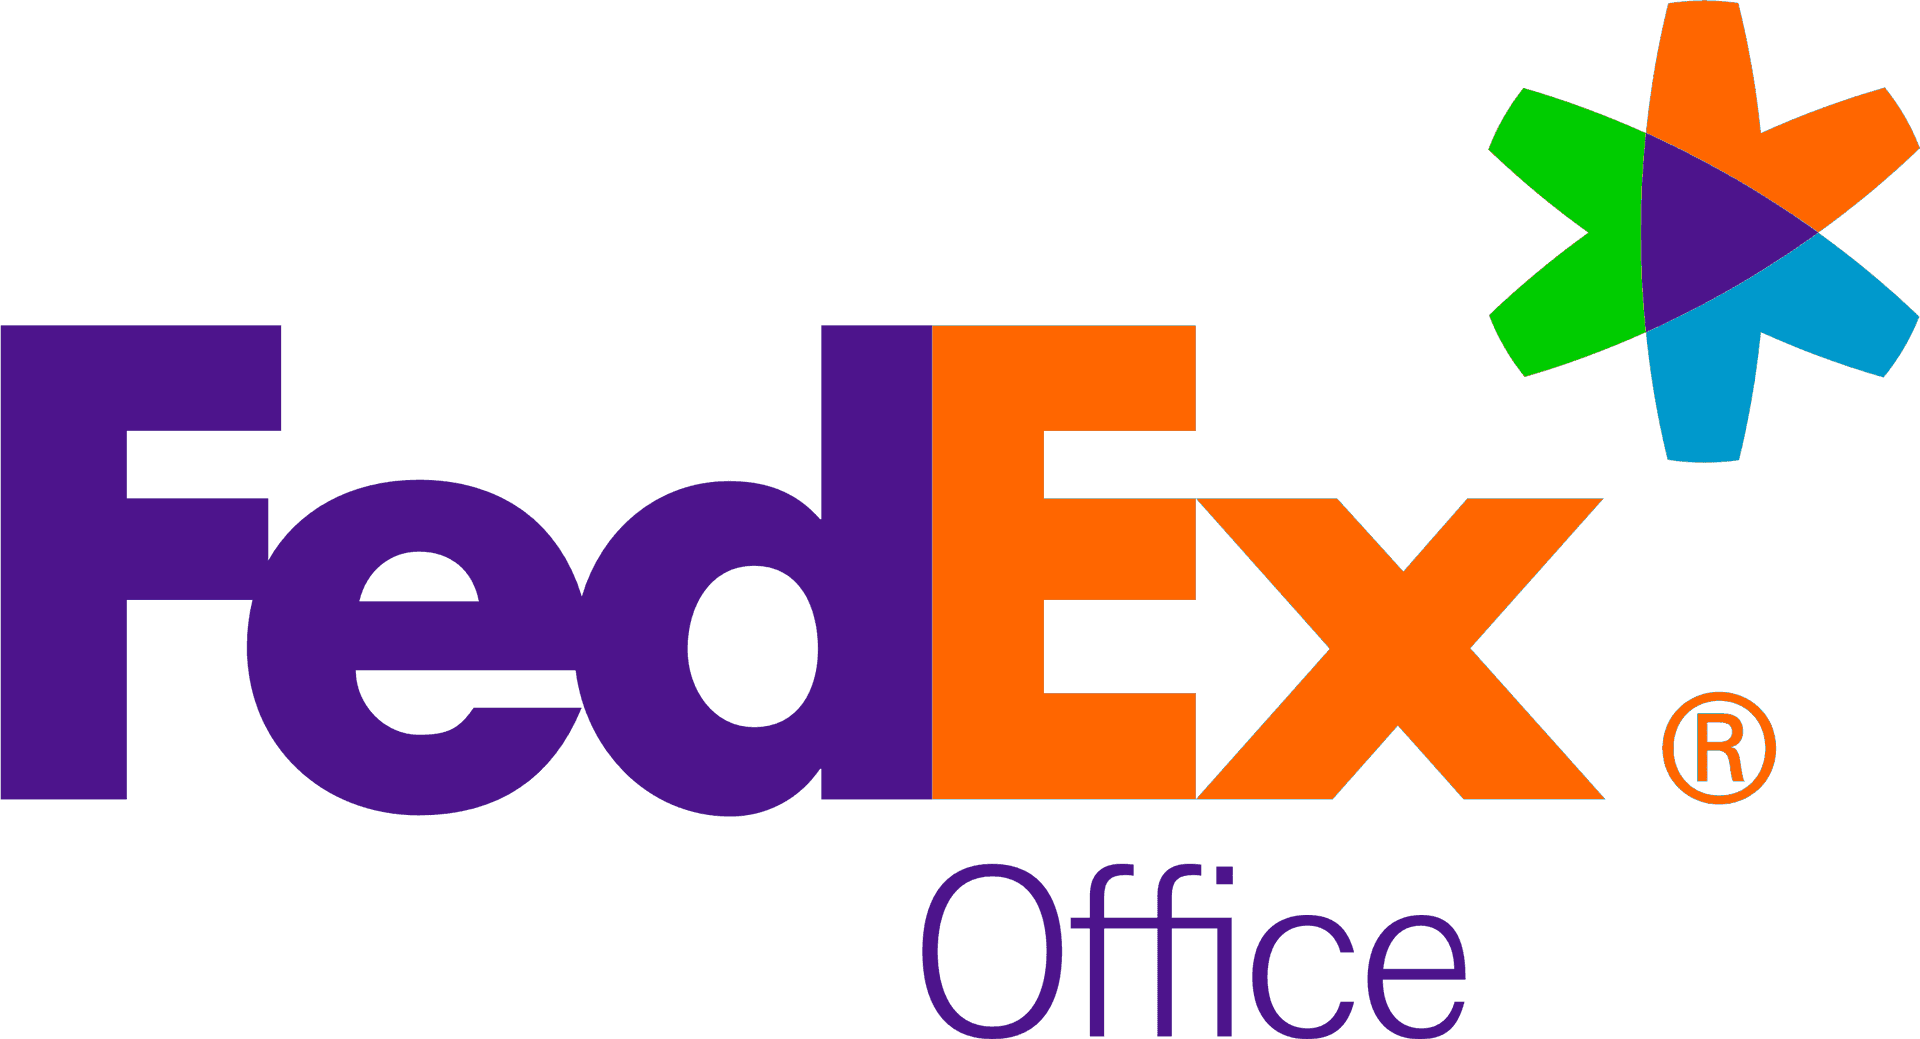 Fed Ex Office Logo PNG